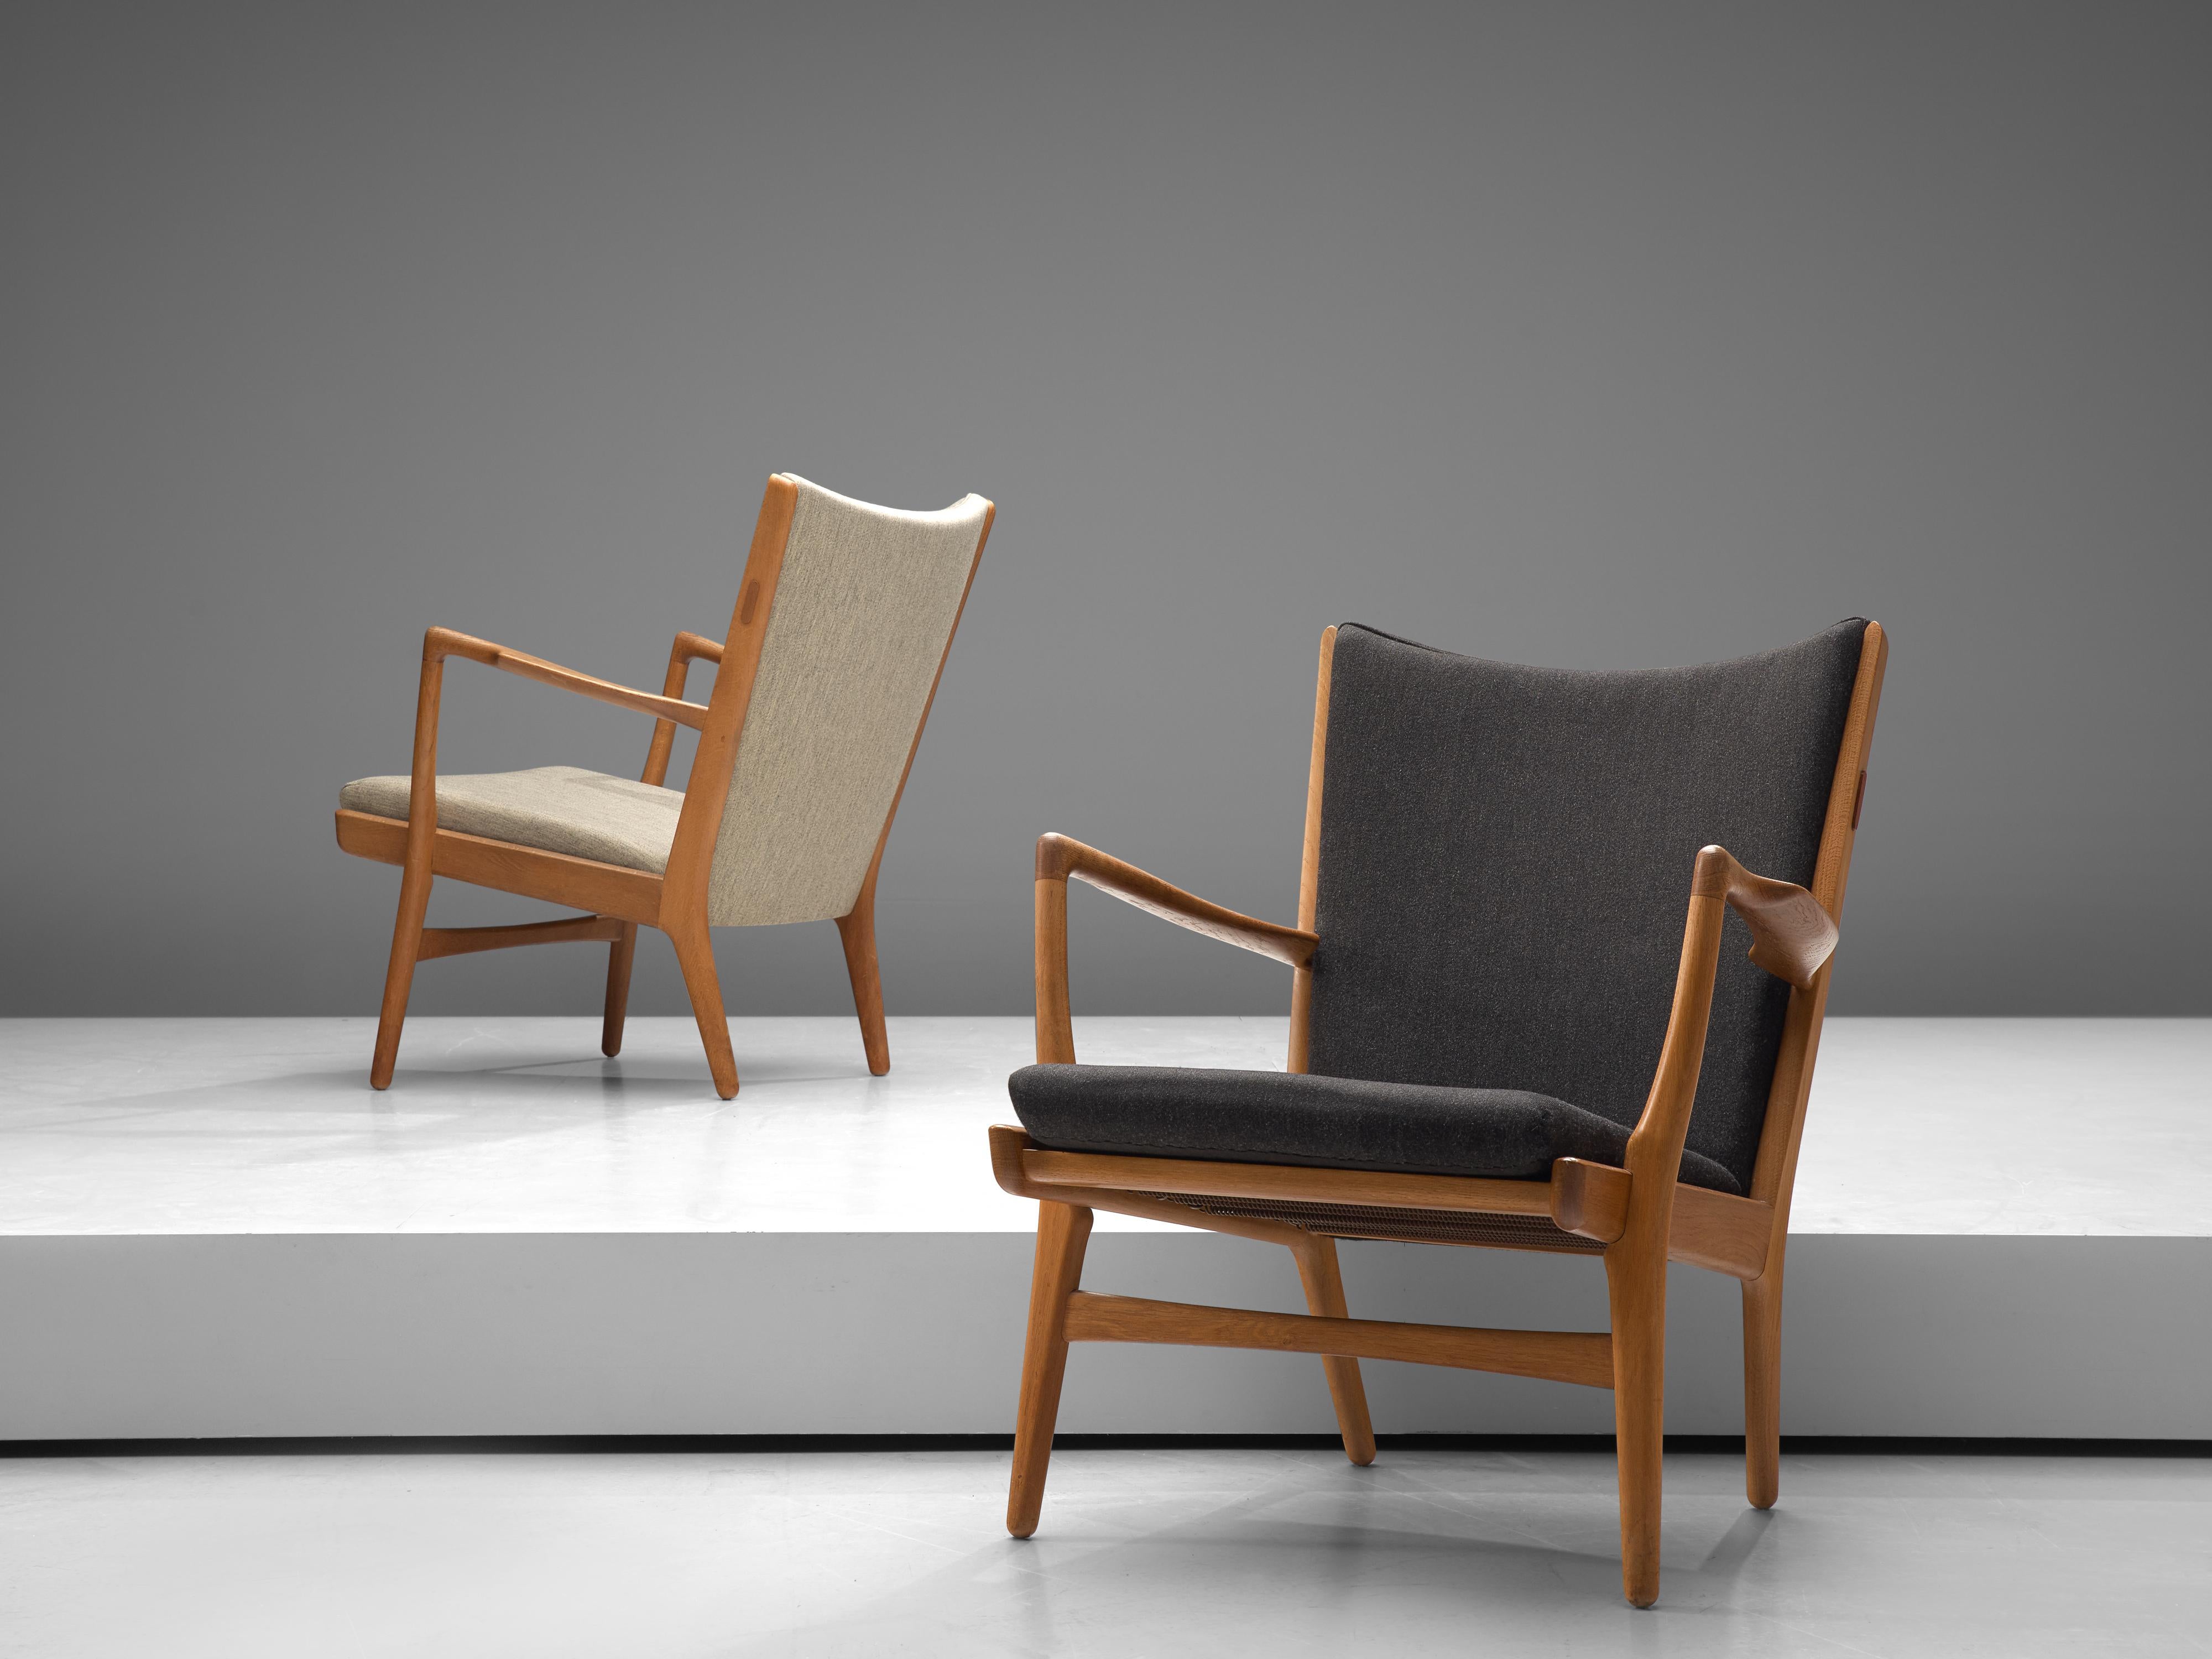 Hans J. Wegner for AP Stolen, pair of lounge chairs 'AP-16', fabric, oak, Denmark, design 1951

Lounge chairs with oak frame designed by the Danish Hans J. Wegner. The proportions of this chair are reminiscent to Wegner's Papa Bear chair, with its